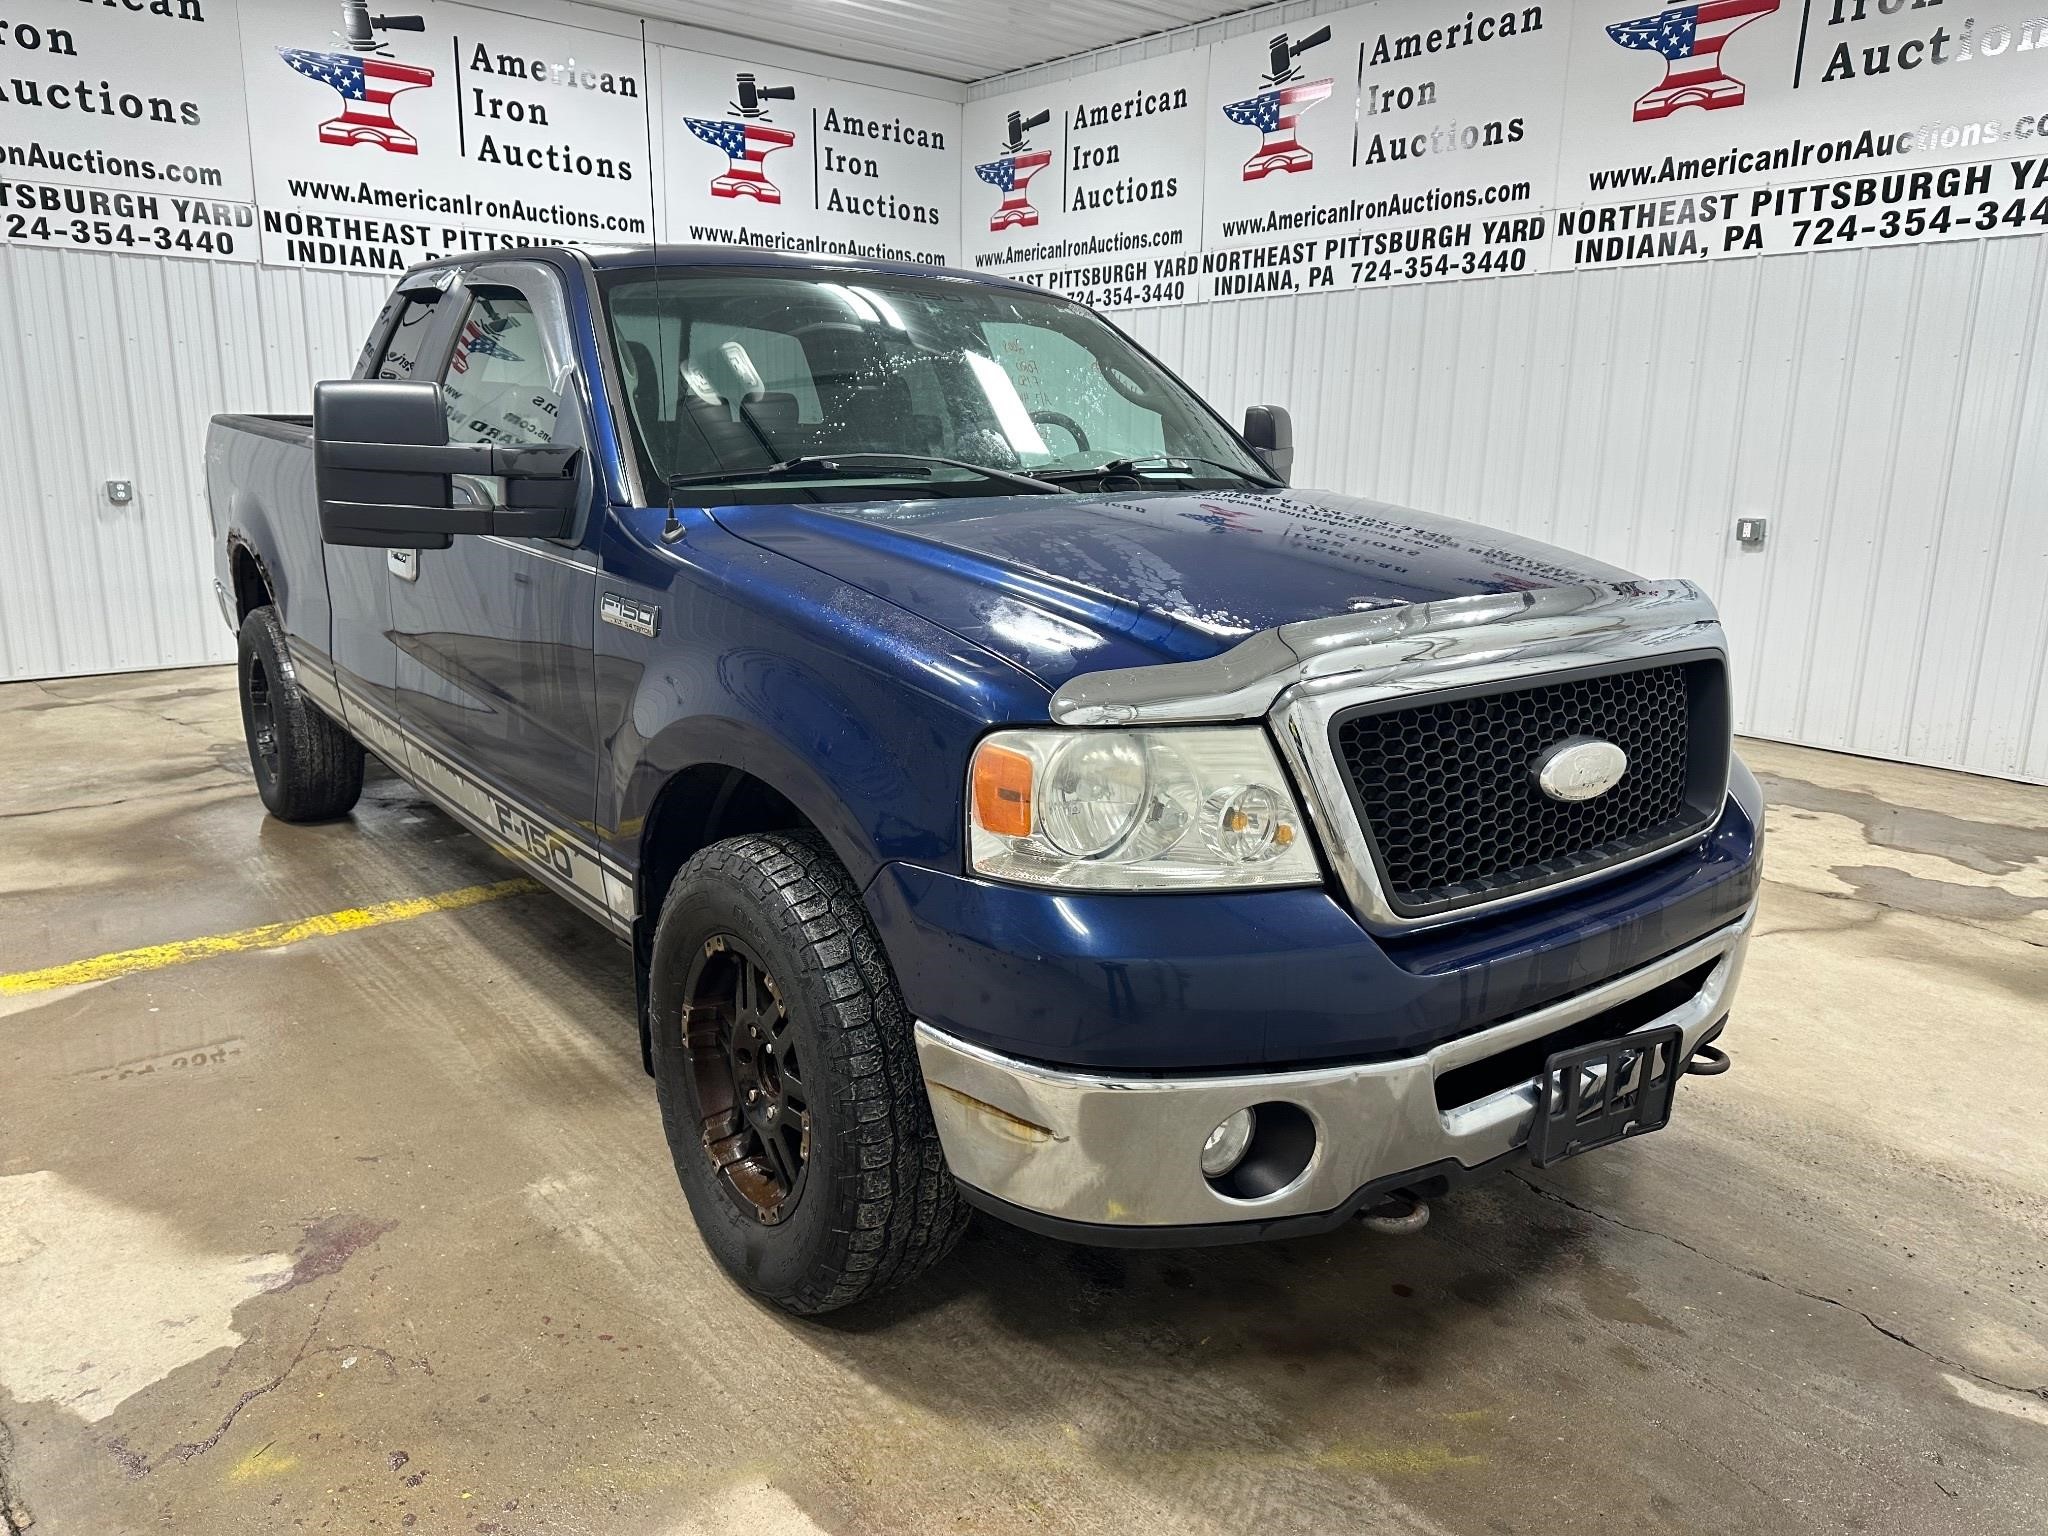 2008 Ford F150 XL Truck- Titled-NO RESERVE